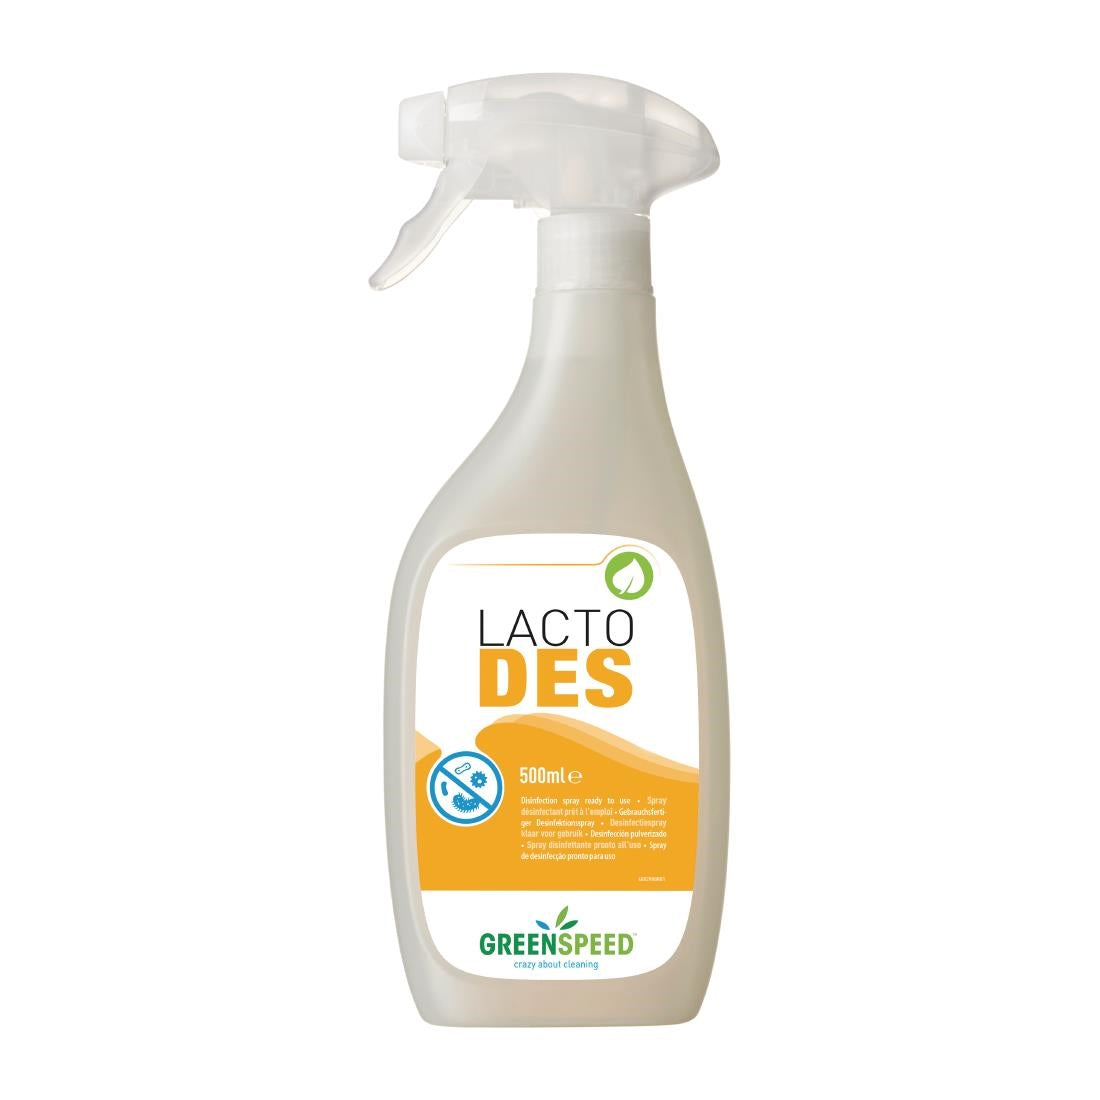 CX182 Greenspeed Disinfectant Spray Ready To Use 500ml JD Catering Equipment Solutions Ltd